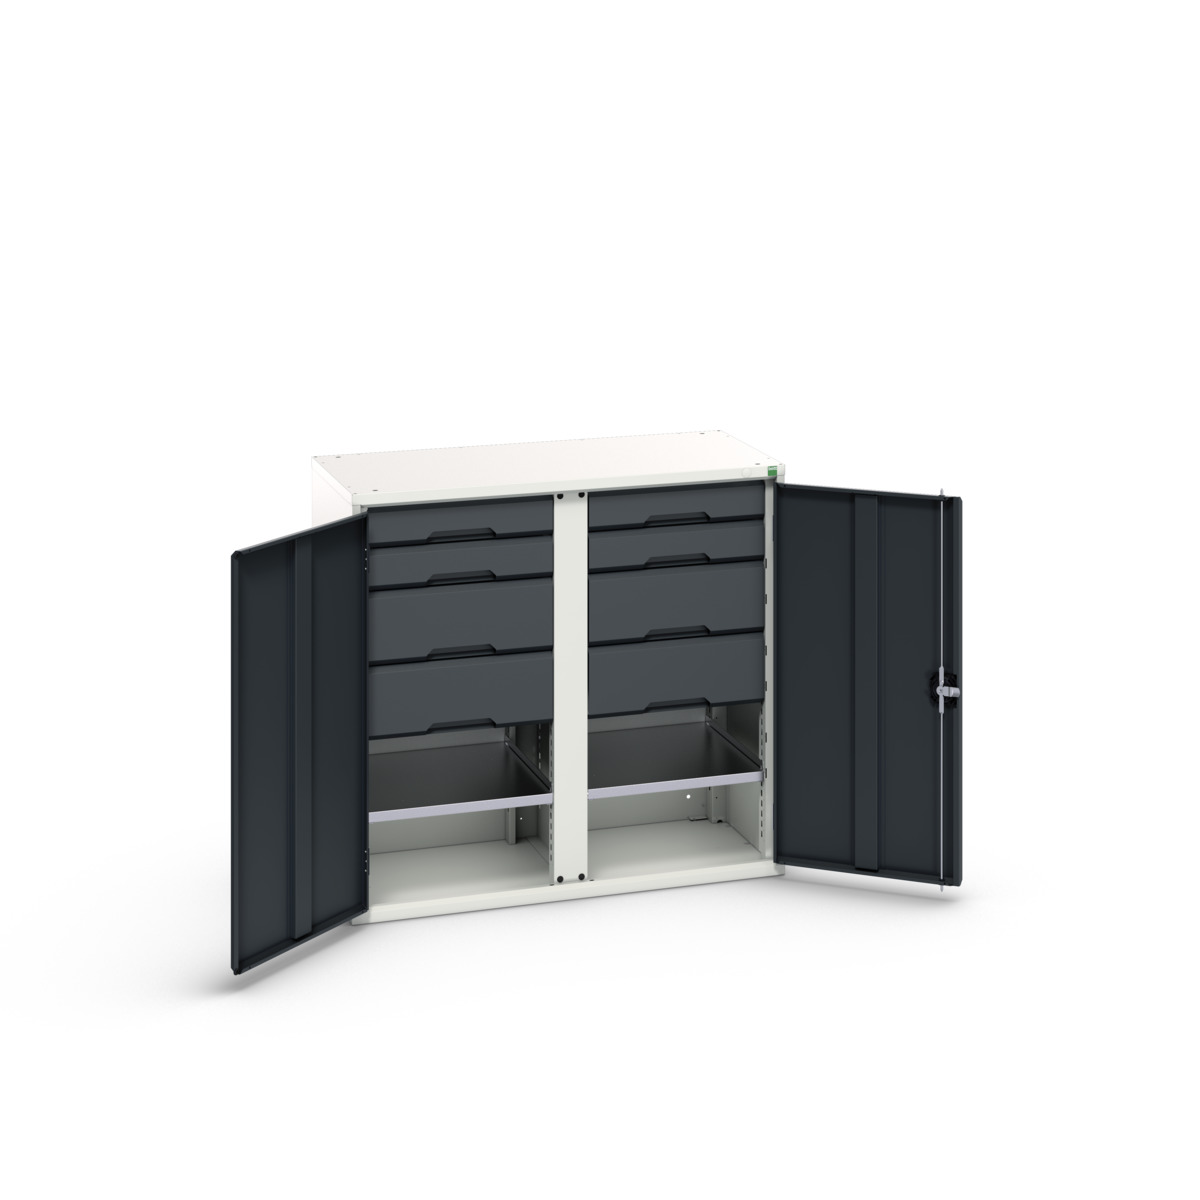 16926557.19 - verso kitted cupboard